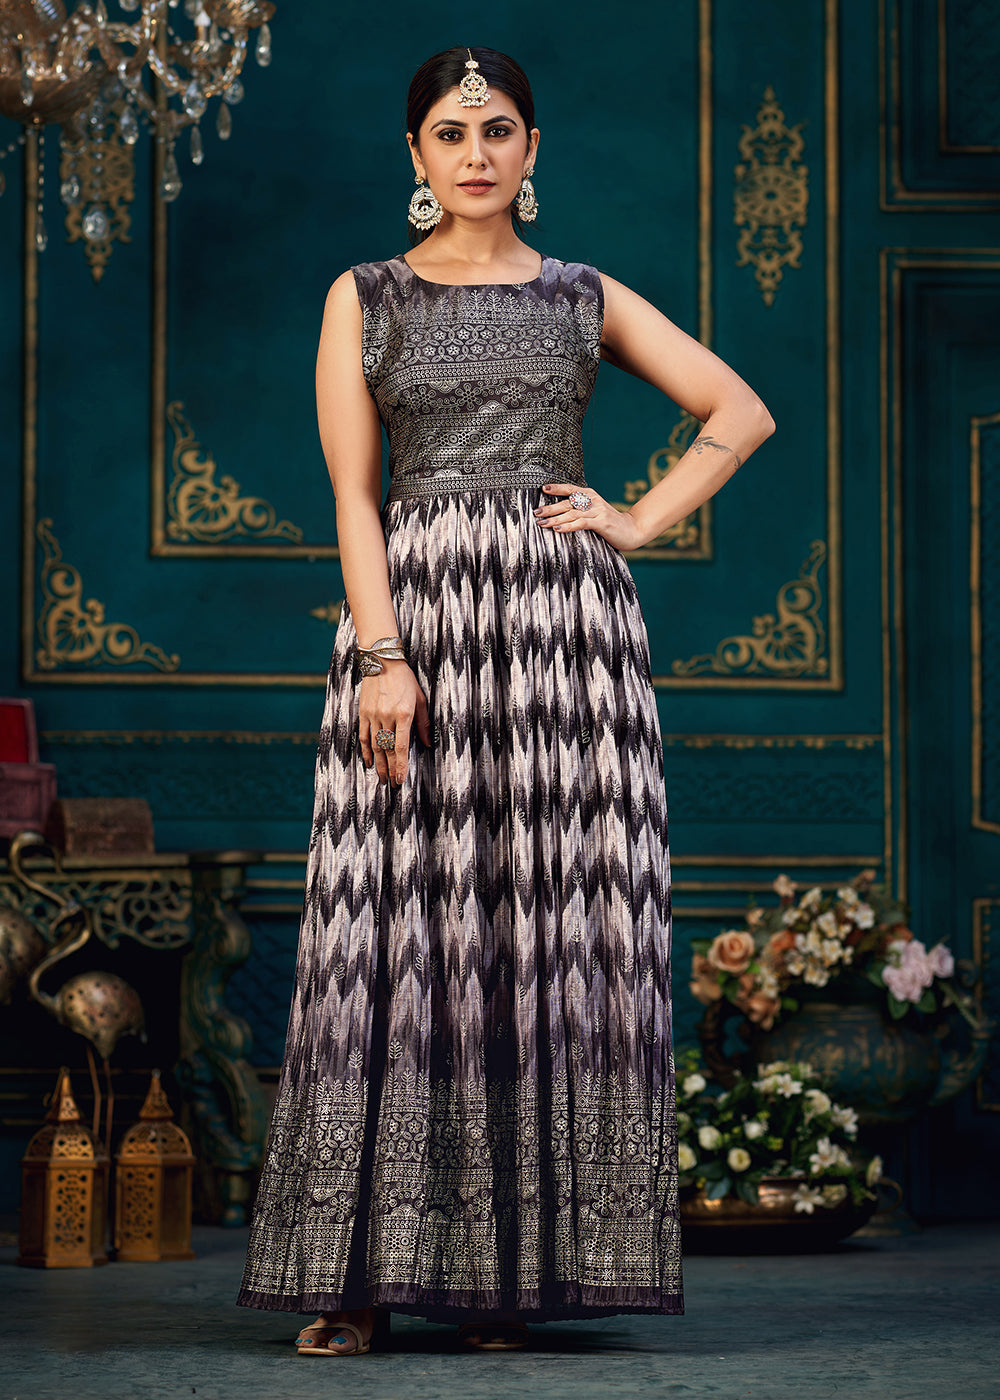 Buy Now Purple Multicolor Digital Foil Printed Ready to Wear Gown Online in USA, UK, Australia, New Zealand, Canada & Worldwide at Empress Clothing.